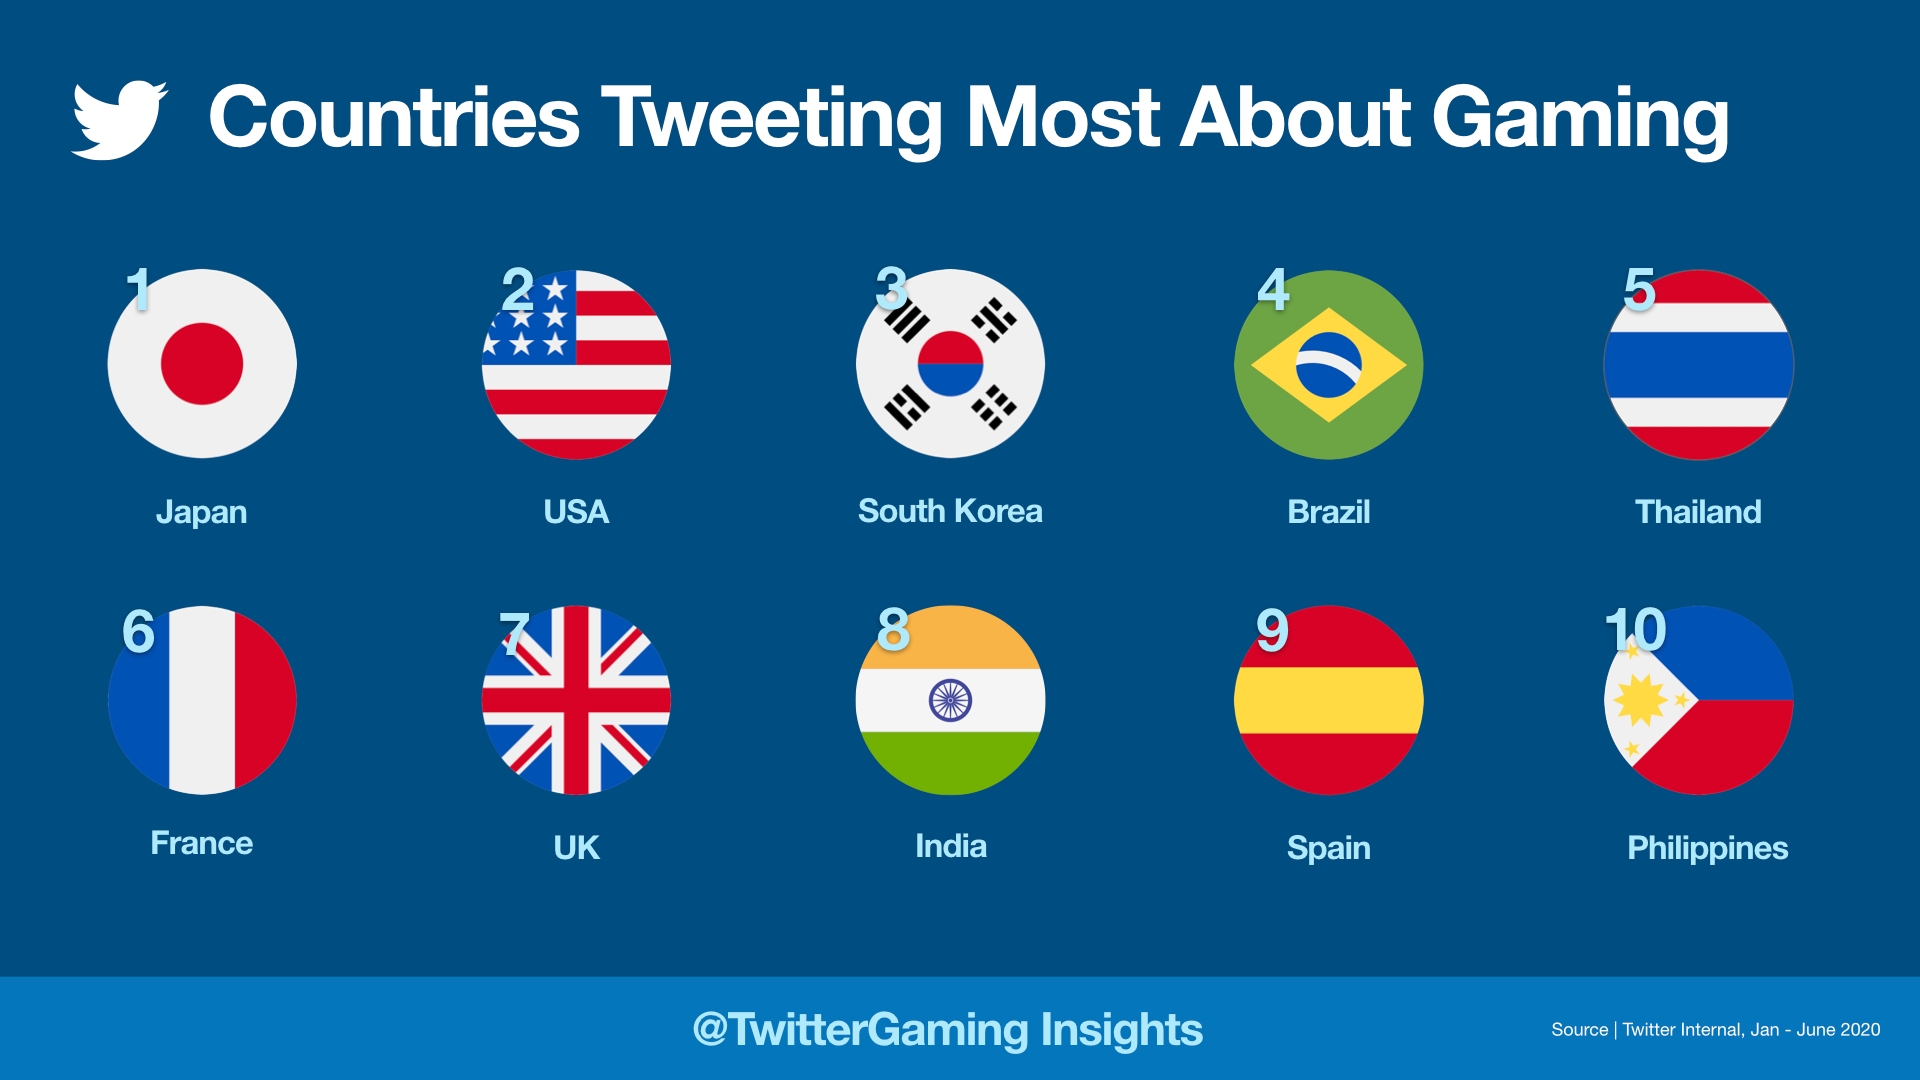 Get your game on: Decoding Filipino gamers on Twitter